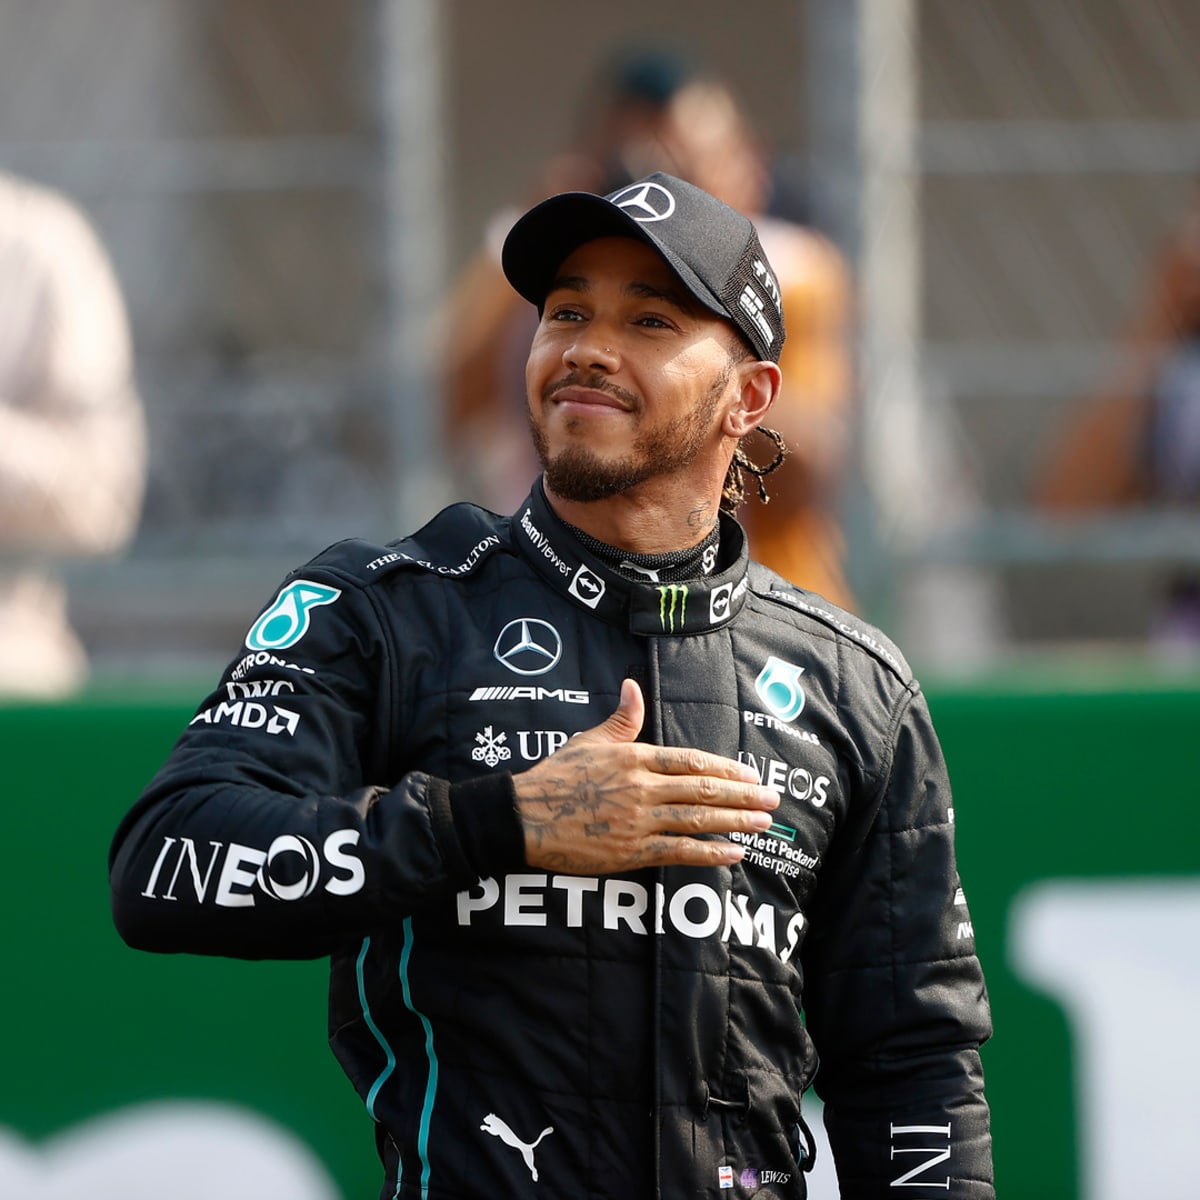 F1 News: Lewis Hamilton Willing To Sacrifice Record For Mercedes Team At  Abu Dhabi GP - F1 Briefings: Formula 1 News, Rumors, Standings and More